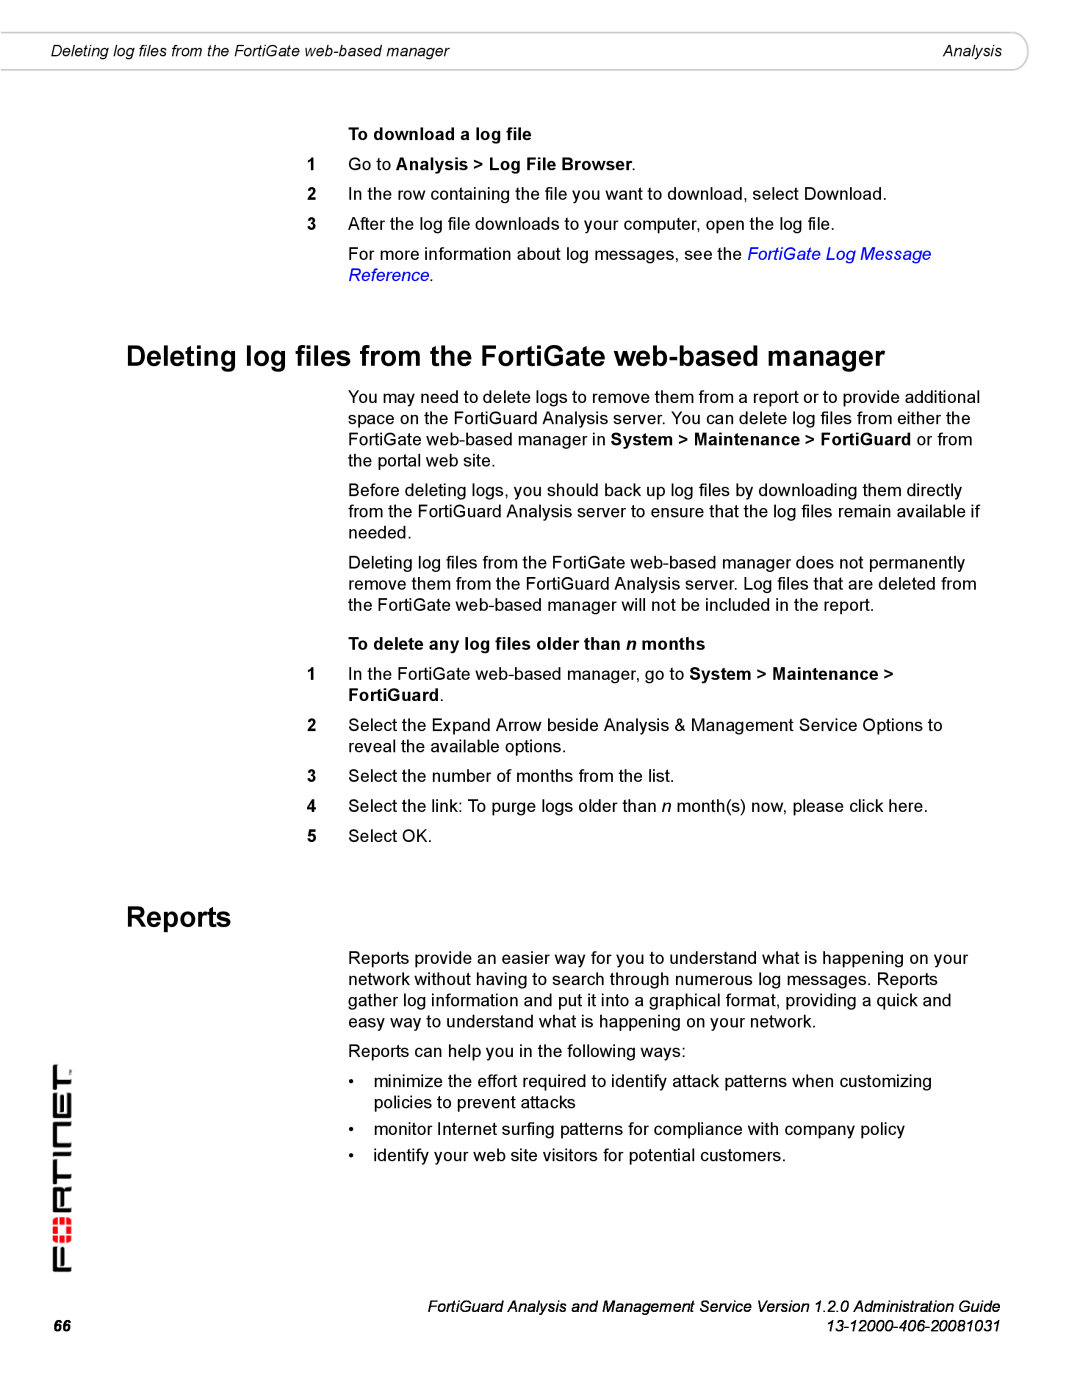 Fortinet 1.2.0 manual Deleting log files from the FortiGate web-based manager, Reports 